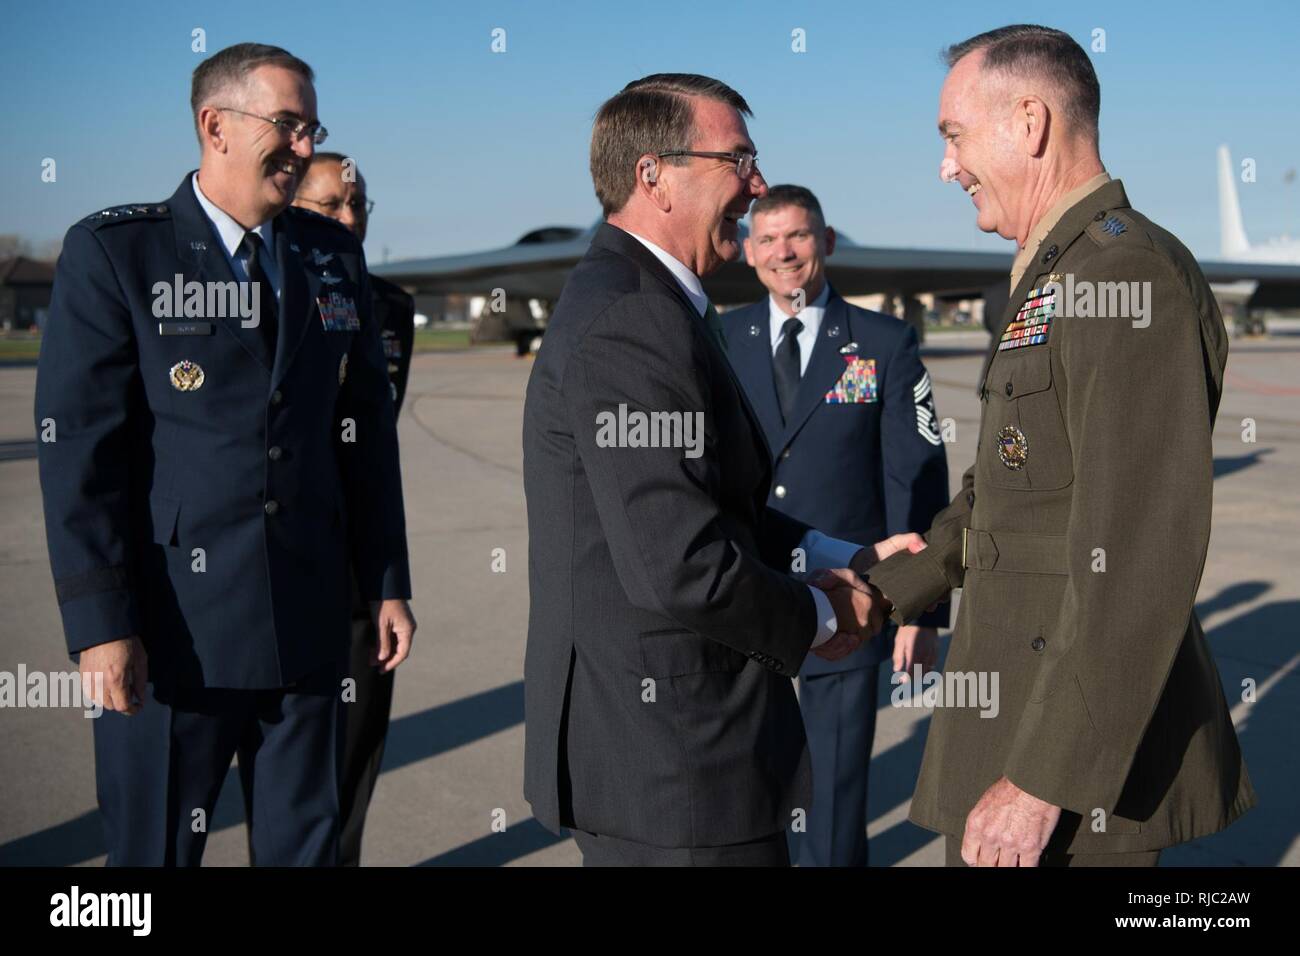 Marine Gen. Joseph F. Dunford Jr., chairman of the Joint Chiefs of Staff, and Defense Secretary Ash Carter participate in the Strategic Command change of command ceremony at Offutt Air Force Base, Omaha, Nebraska Nov. 3, 2016.  Air Force Gen. John E. Hyten assumes command from Navy Adm. Cecil D. Haney. Stock Photo